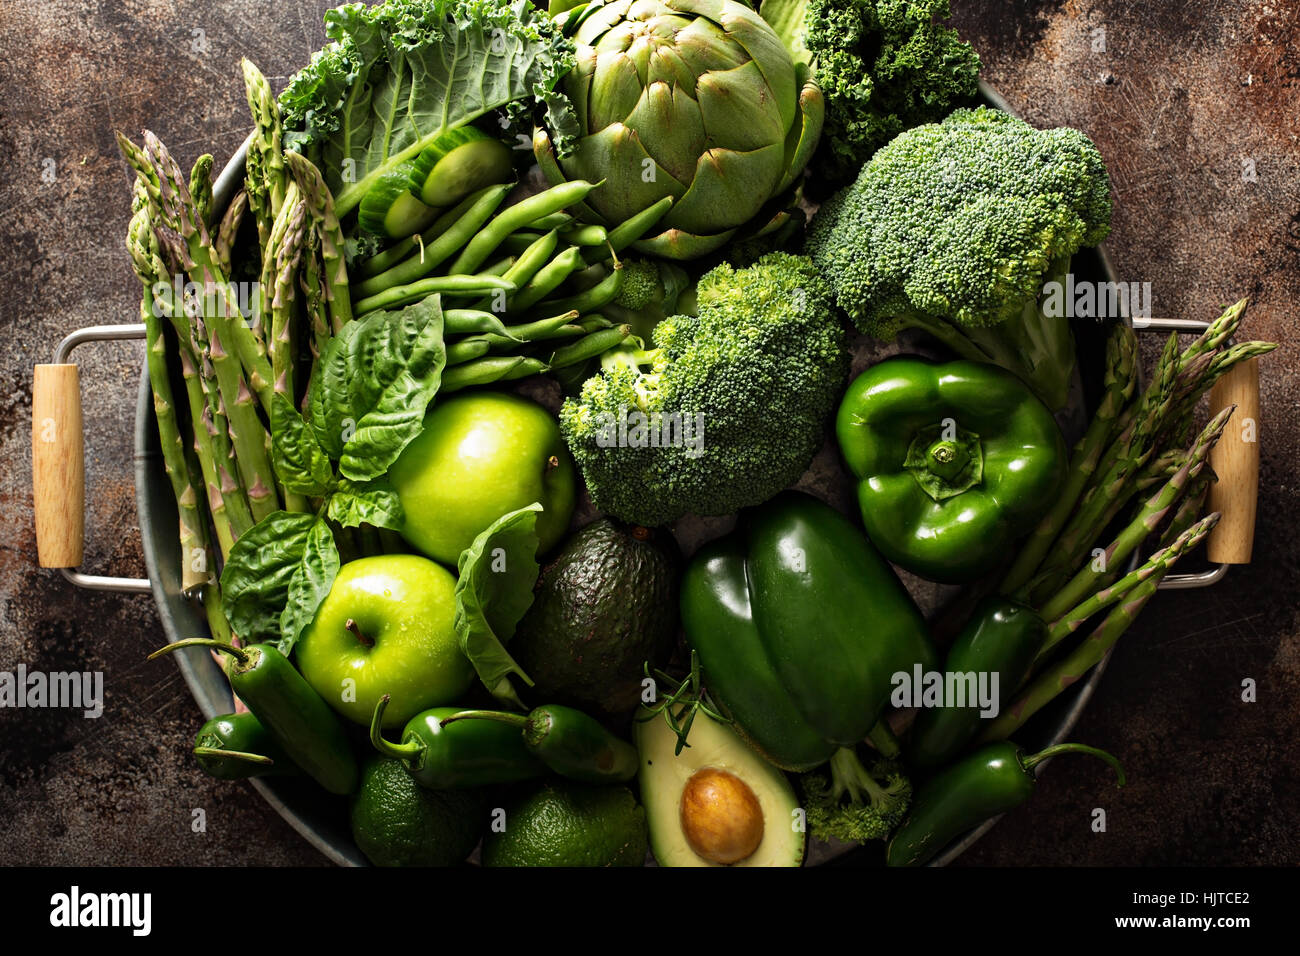 Variety of green vegetables and fruits Stock Photo